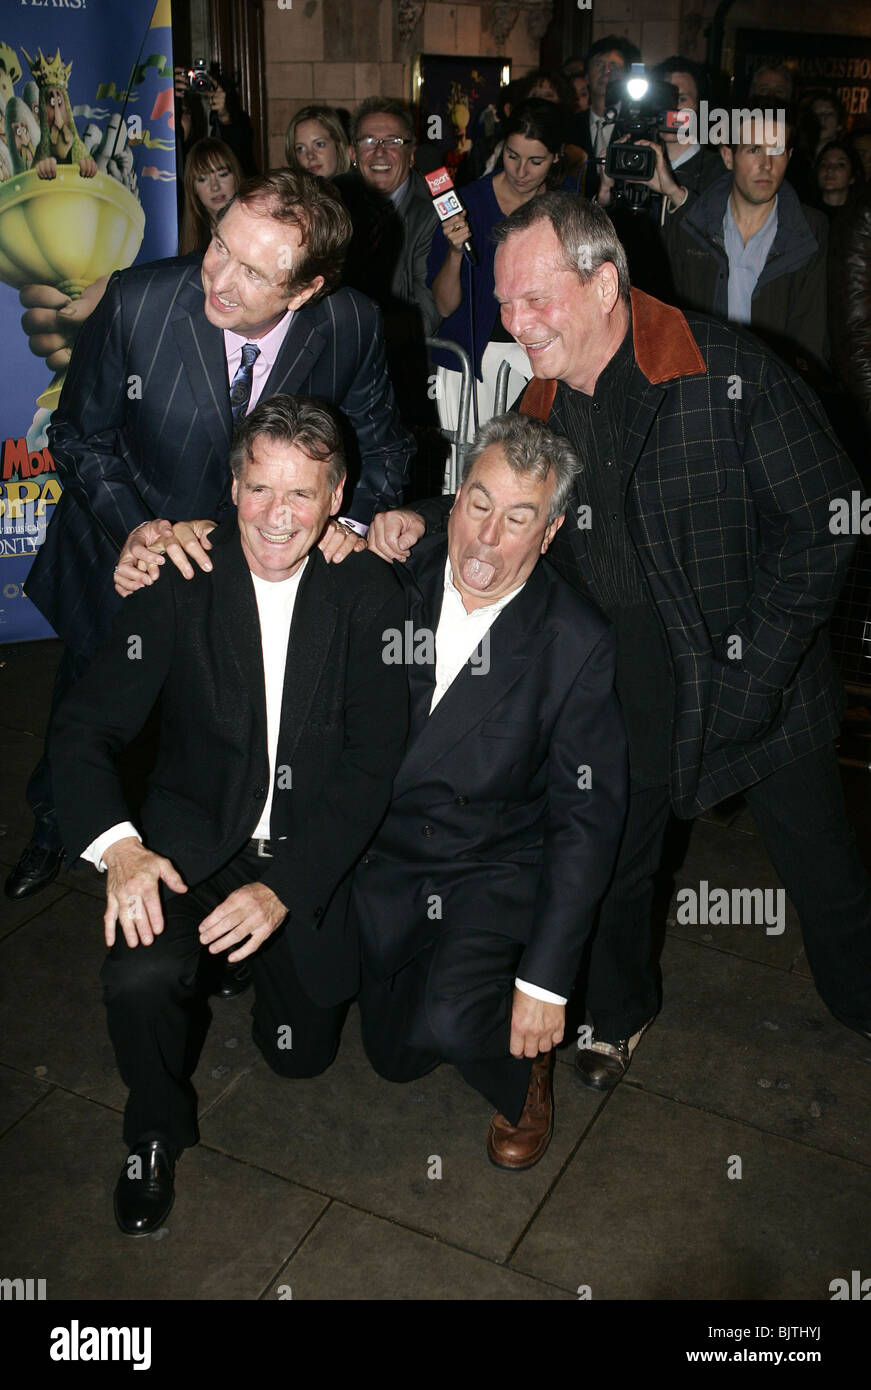 ERIC IDLE MICHAEL PALIN TERRY JONES & TERRY GILLIAM UK PREMIERE OF NEW WEST END SHOW SPAMALOT PALACE THEATRE LONDON ENGLAND Stock Photo